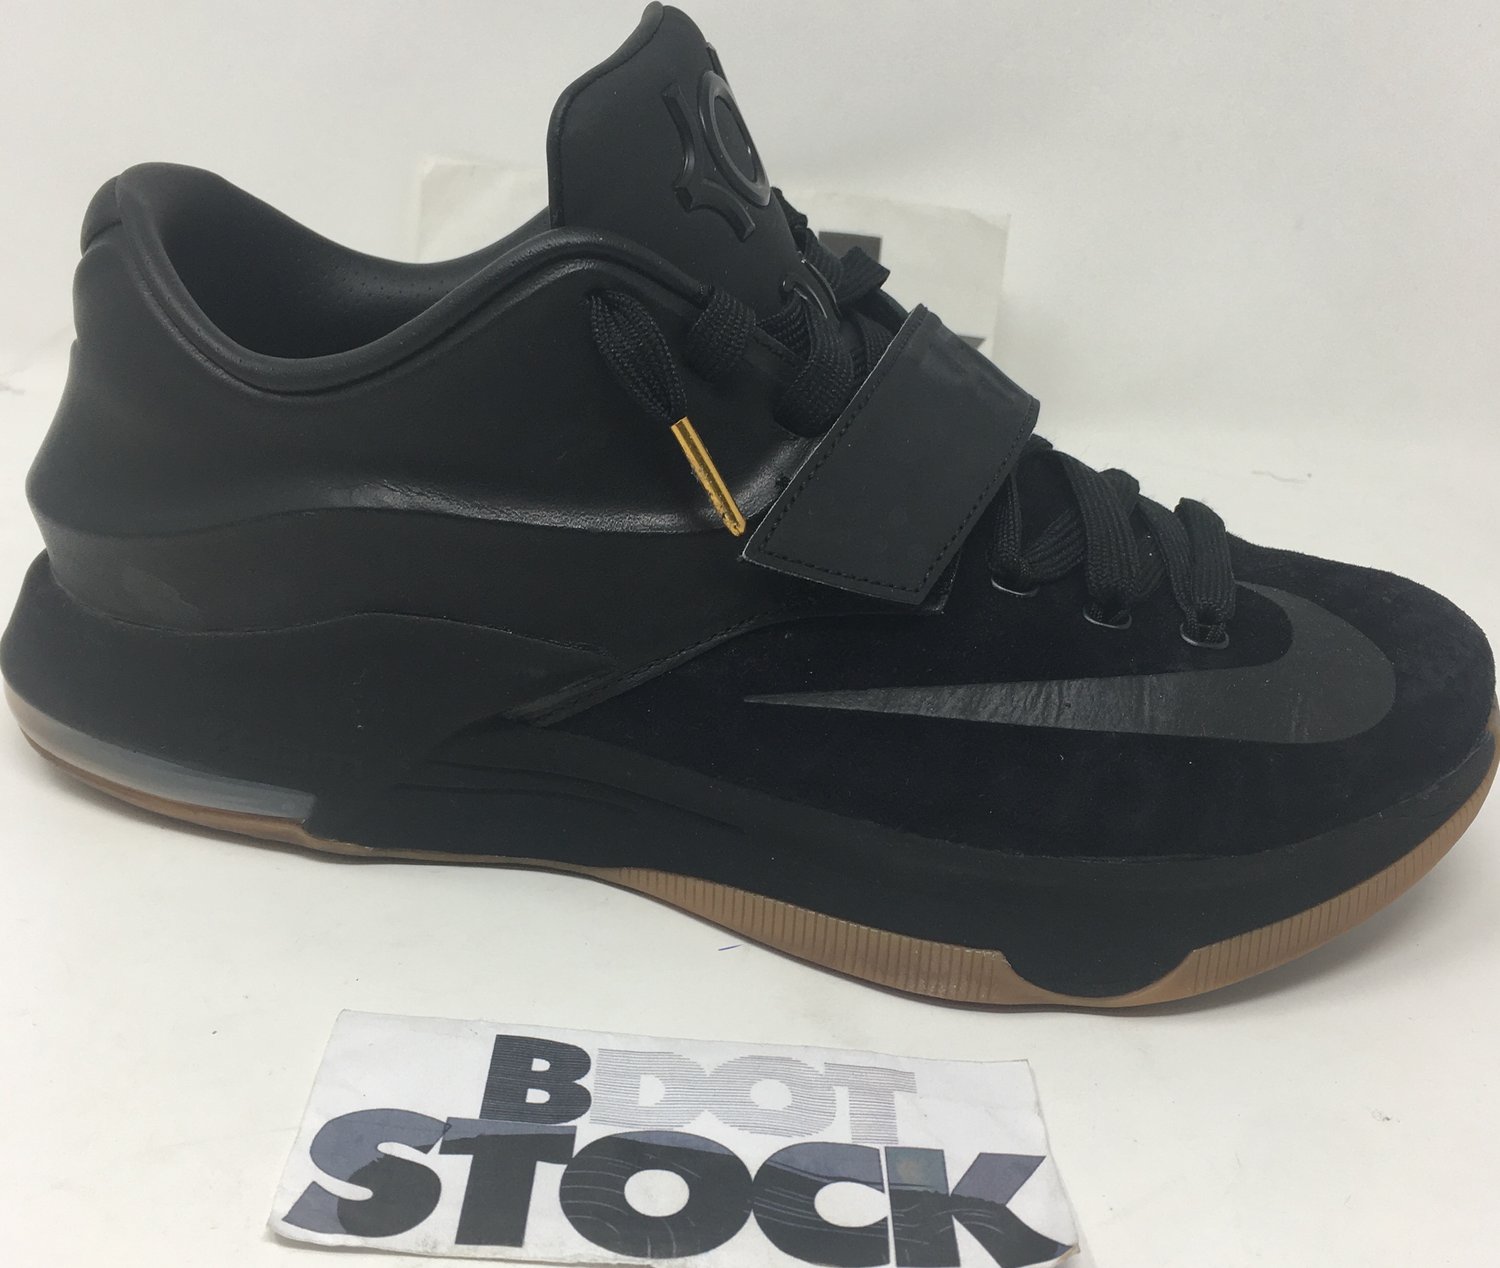 Image of Nike KD 7 Ext Suede QS "Black" Sz 10